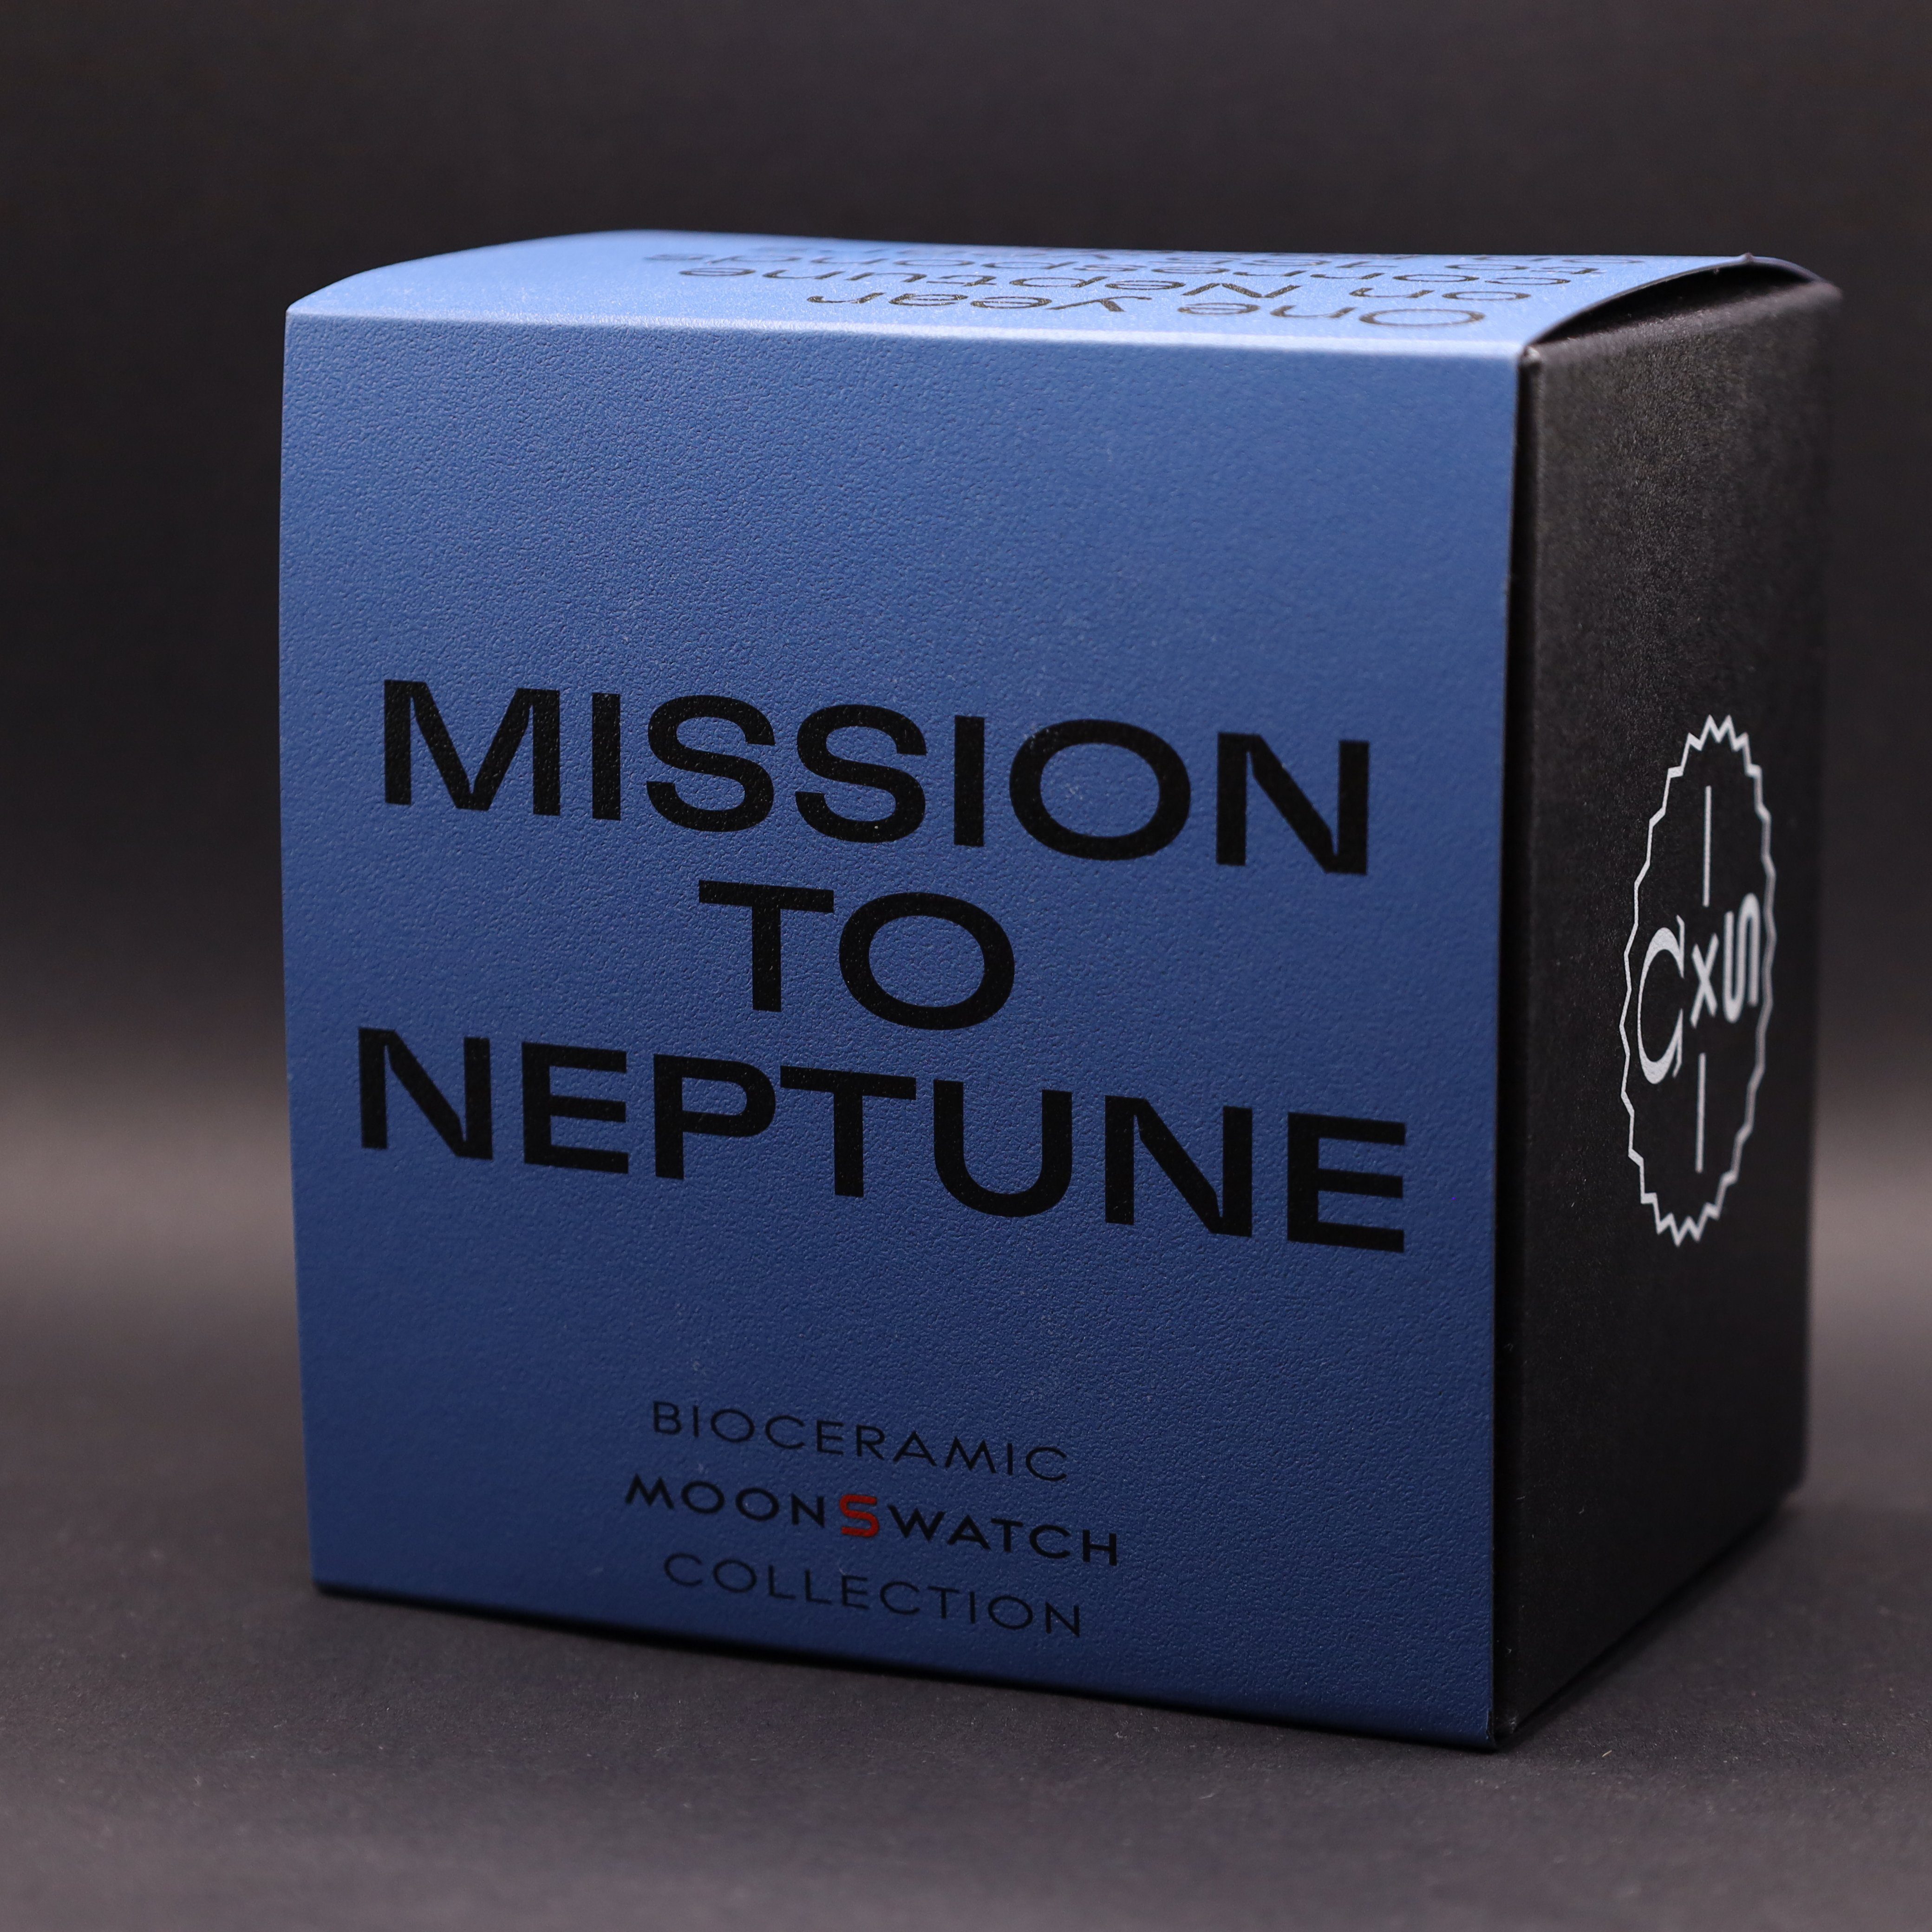 Neptune Mission (1-tlg) Swatch Bioceramic SO33N100, Chronograph Omega Moonswatch Omega to